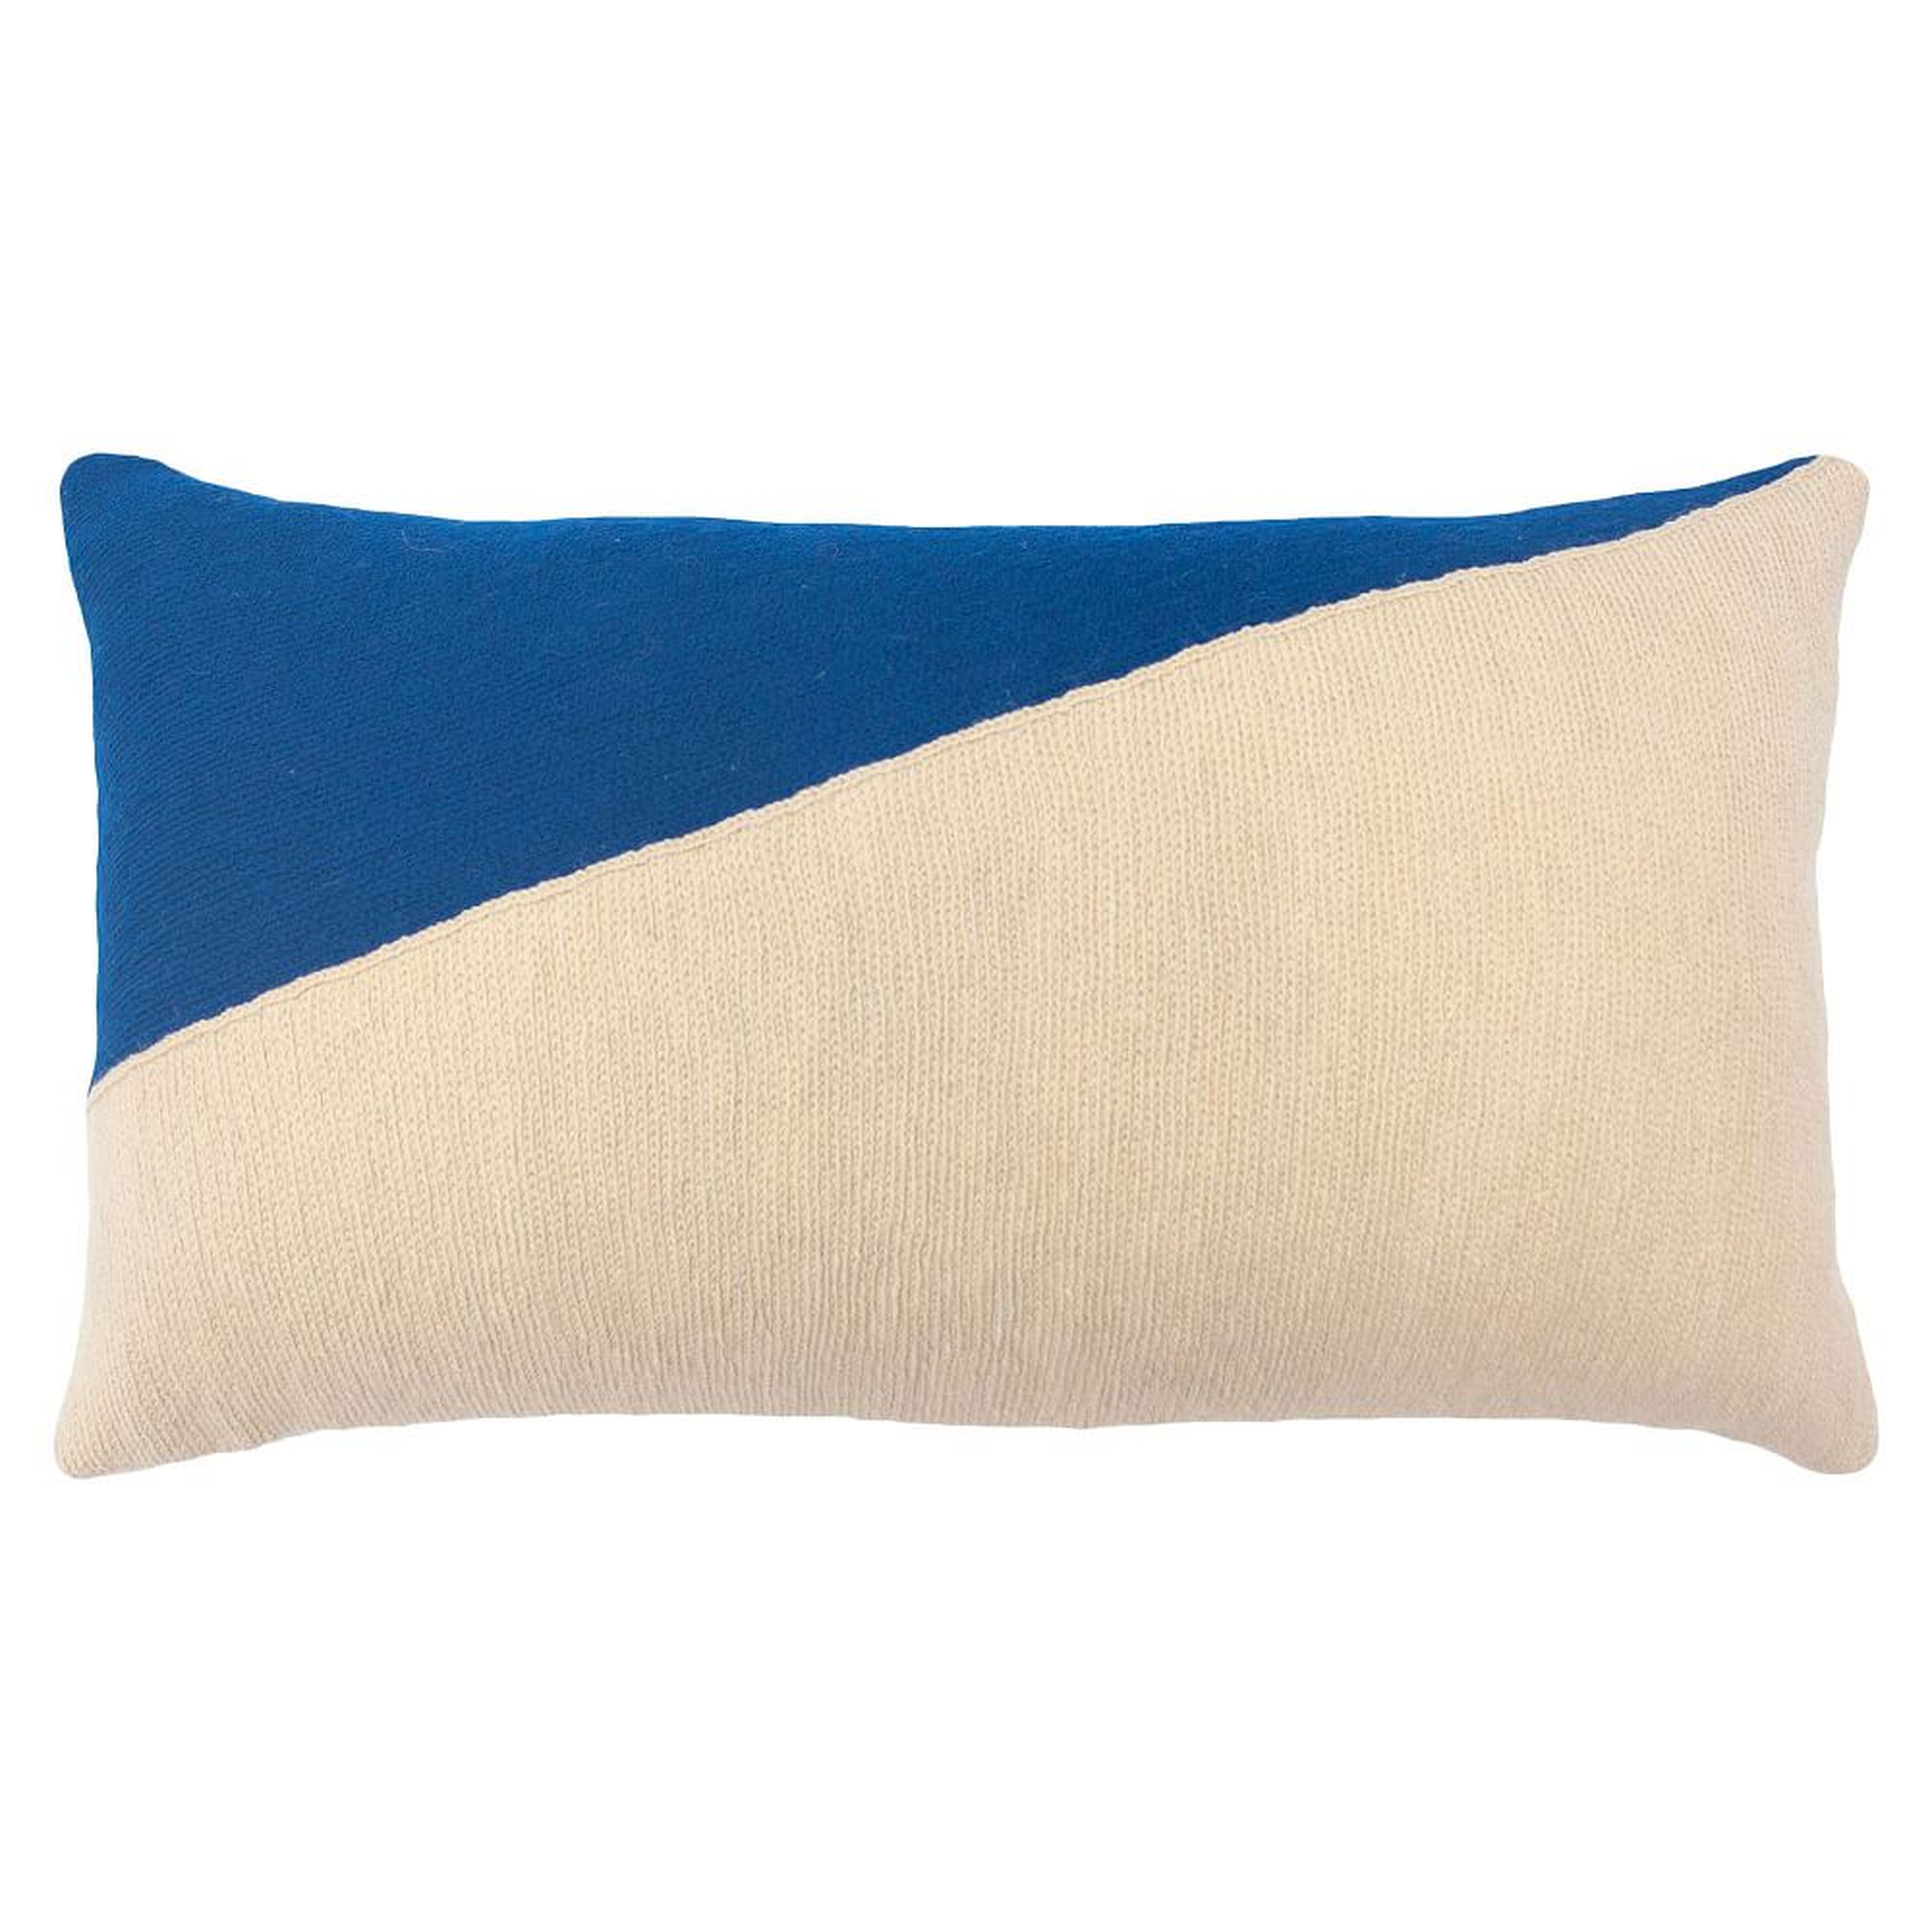 Marianne Triangle Pillow Hand, Embroidered Blue Pillow - West Elm